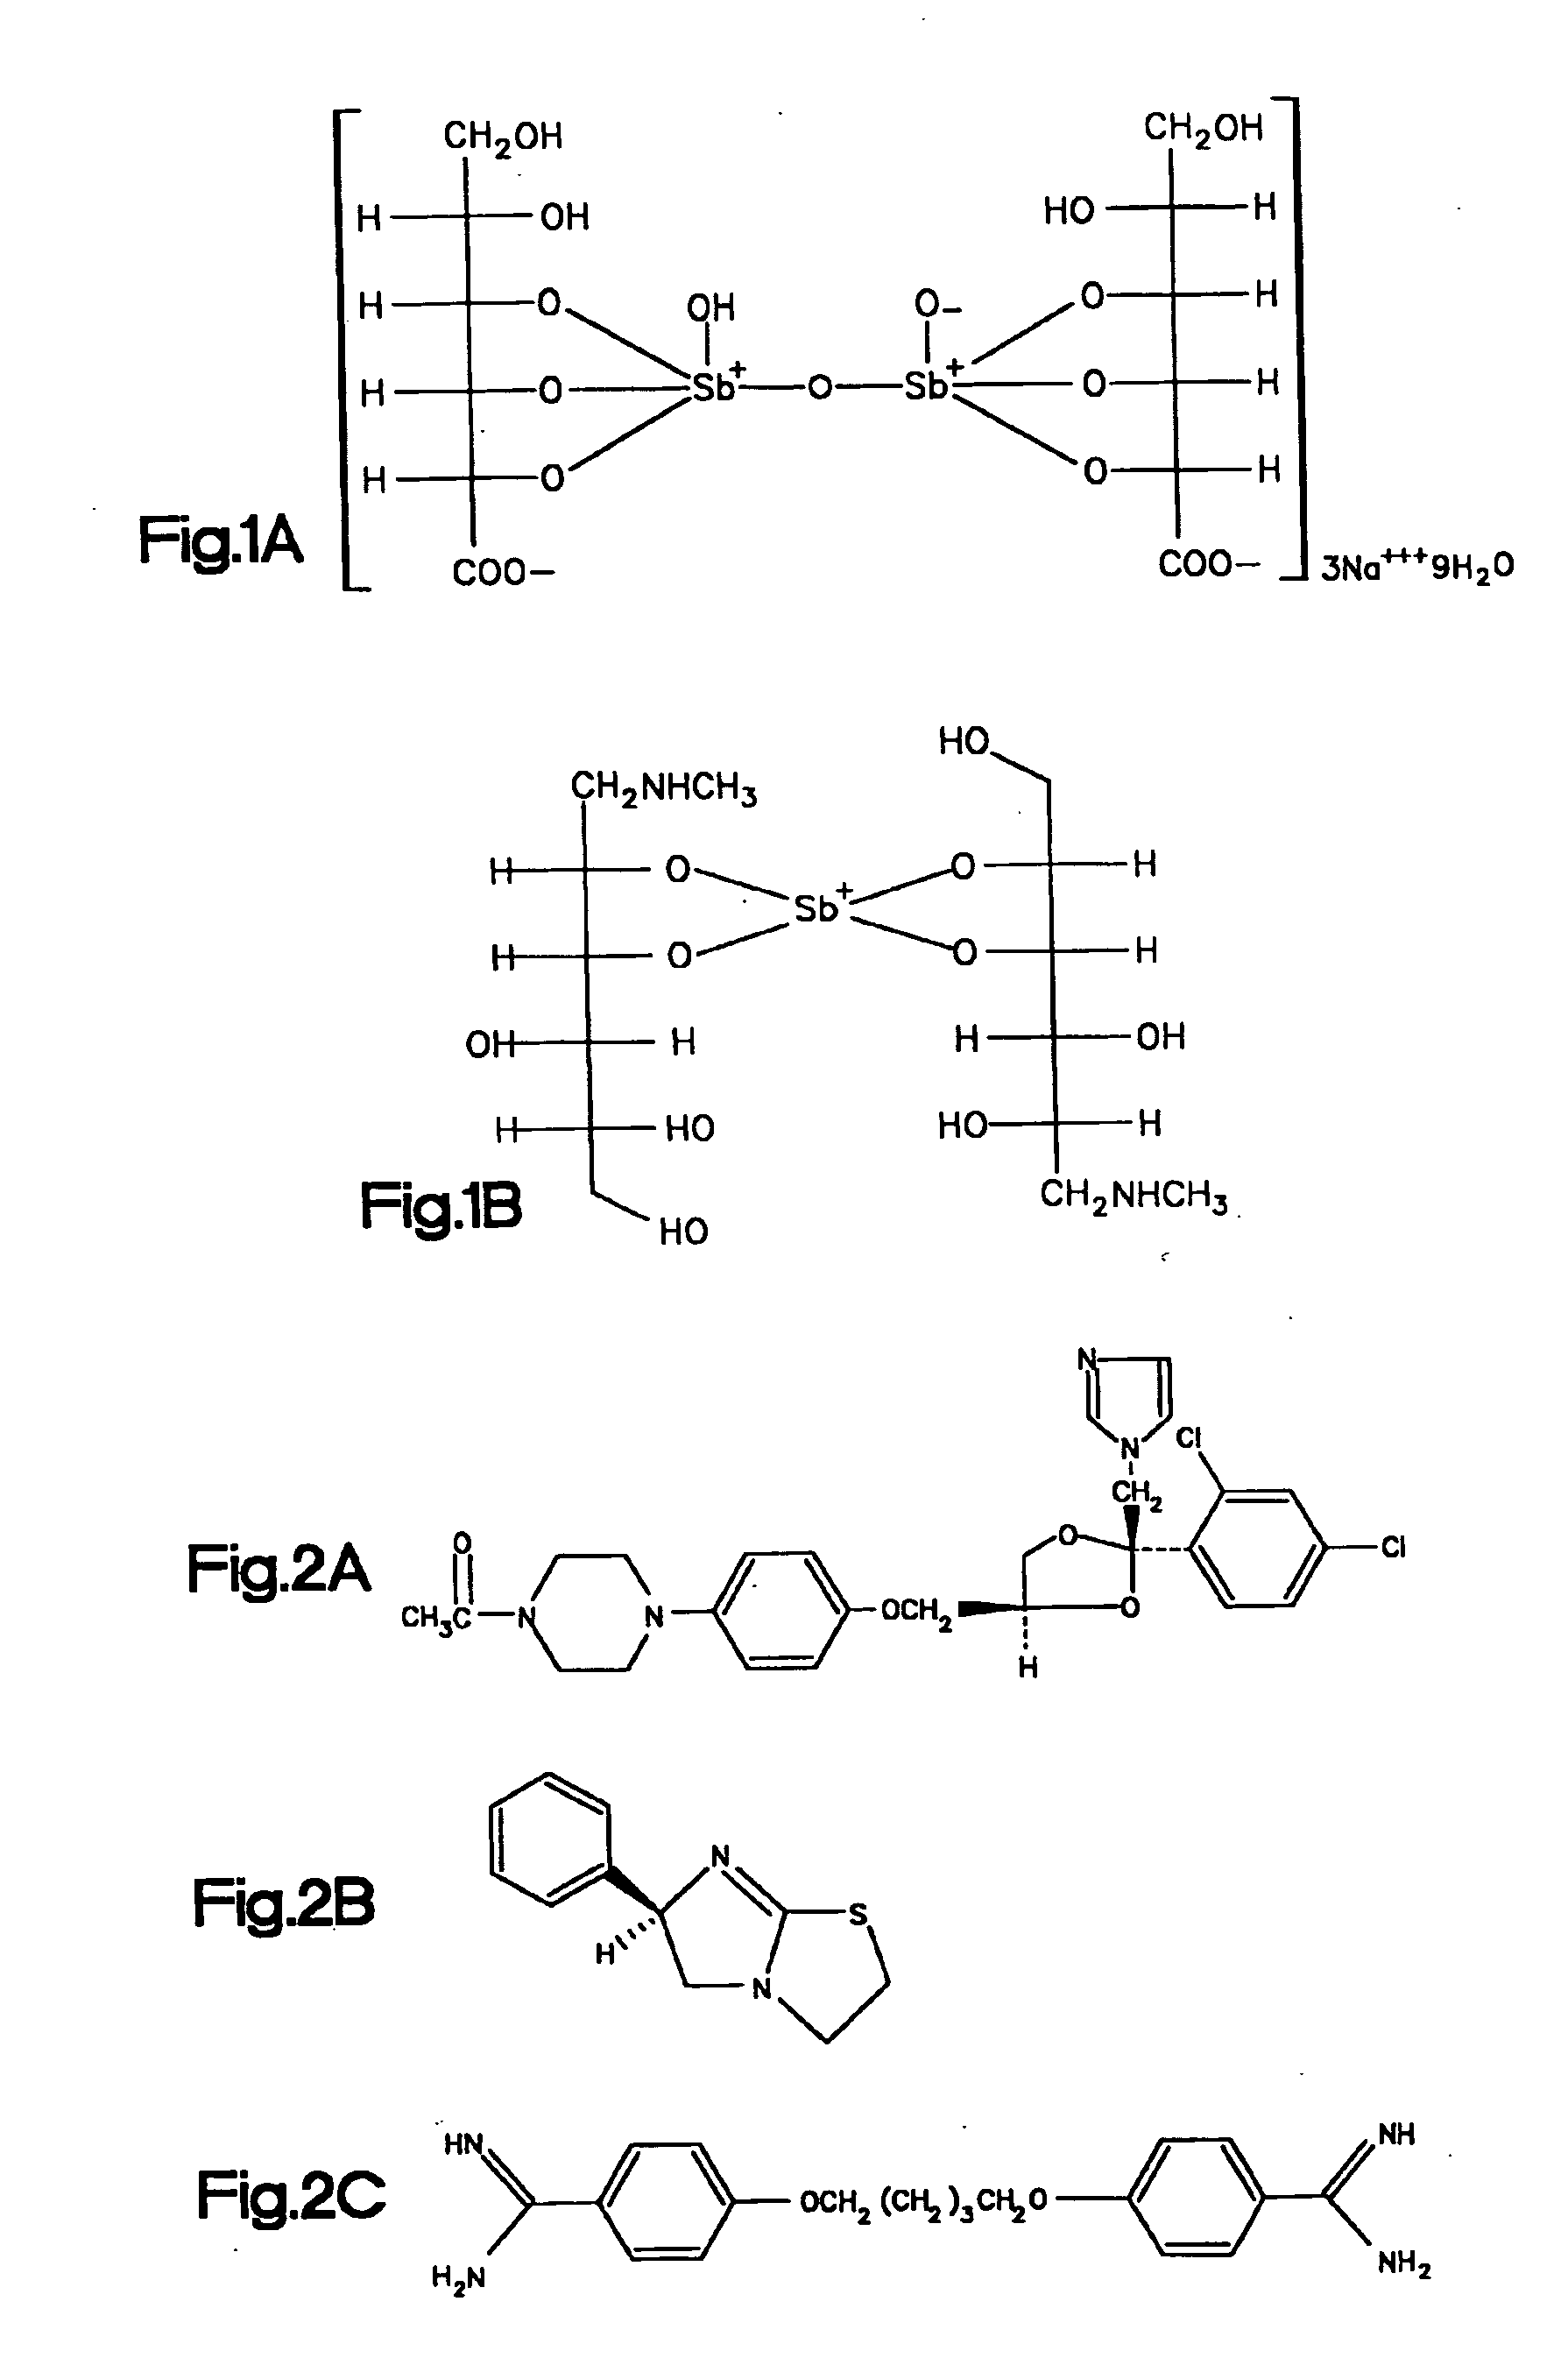 PTPase inhibitors and methods of using the same